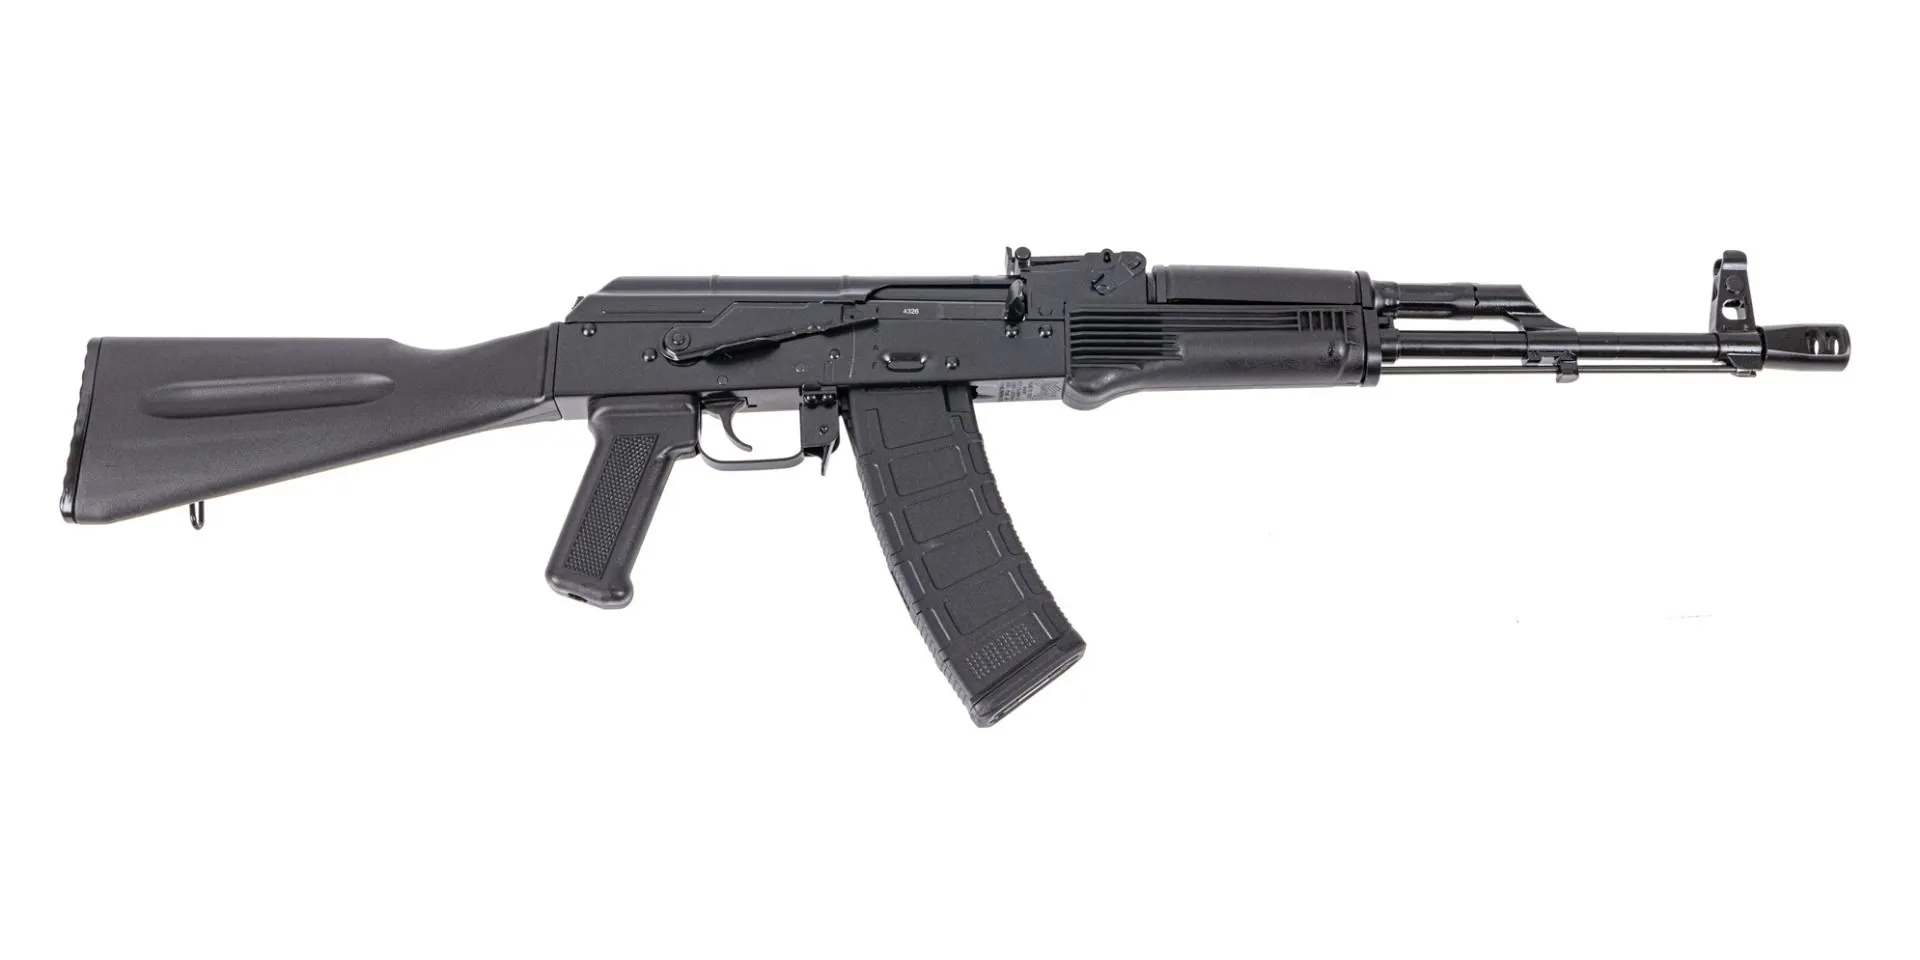 PSAK-74AKM CLASSIC POLYMER RIFLE WITH TOOLCRAFT TRUNNION, BOLT, AND CARRIER, BLACK